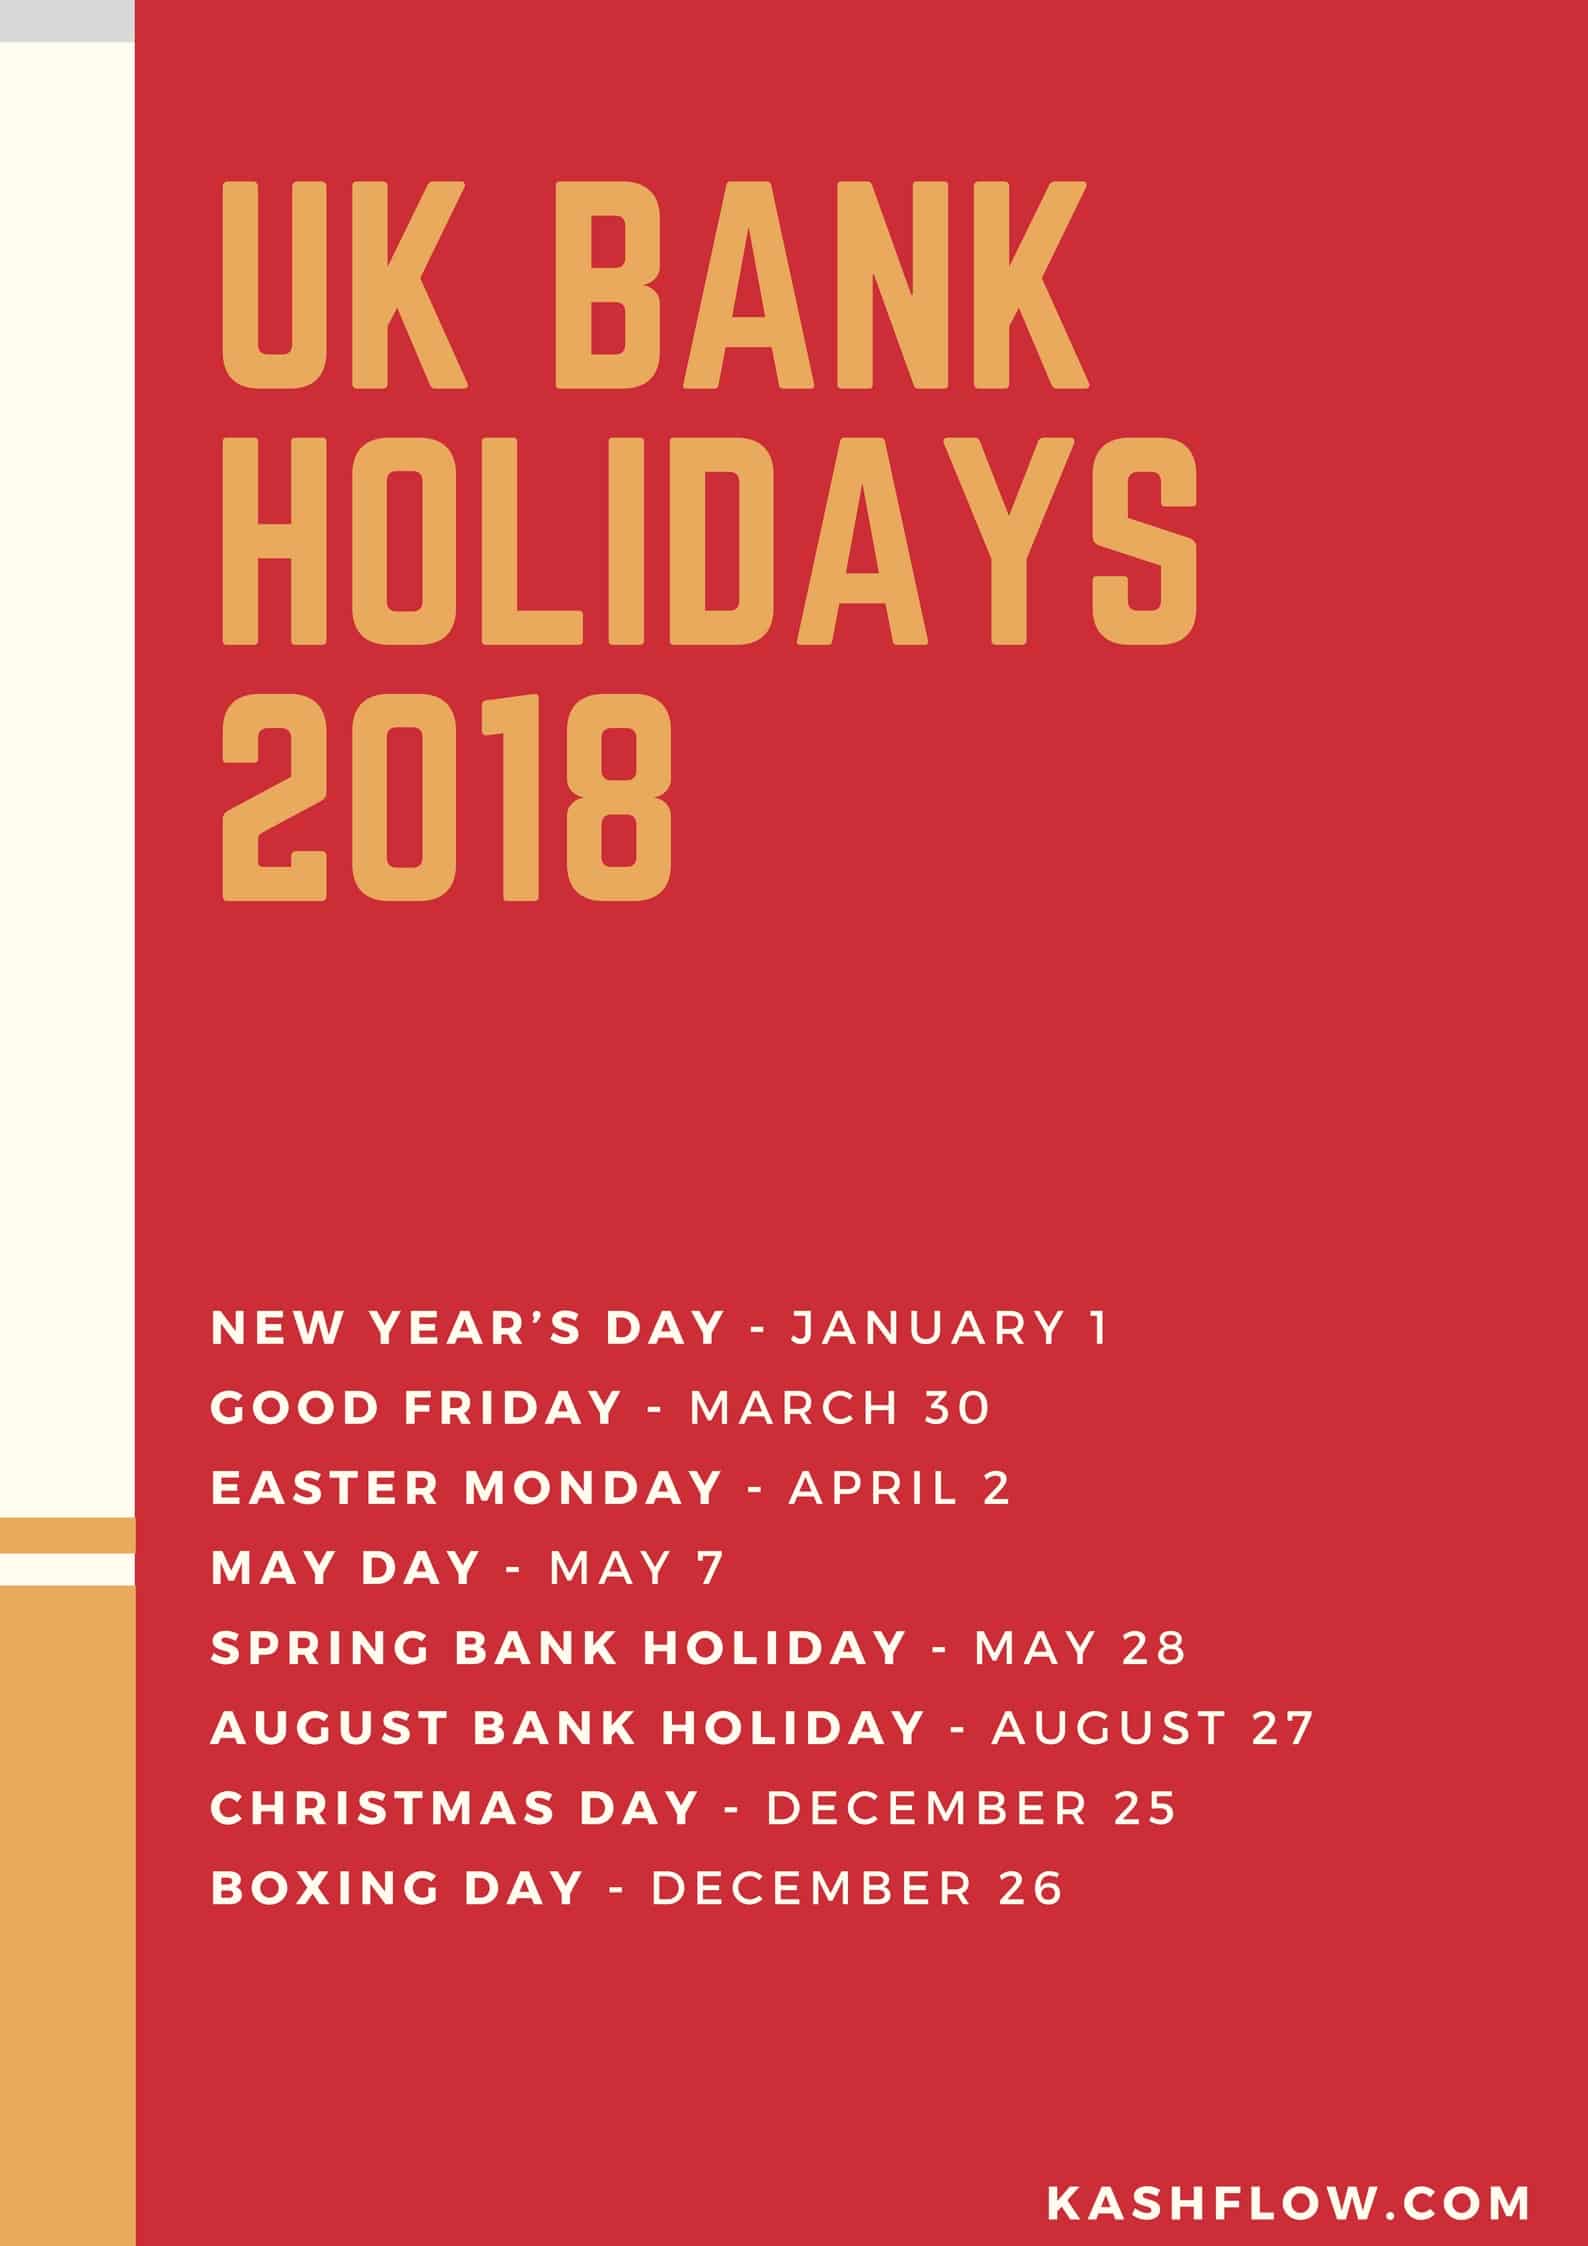 List of 2018 UK Bank Holidays, which can be included in holiday entitlement